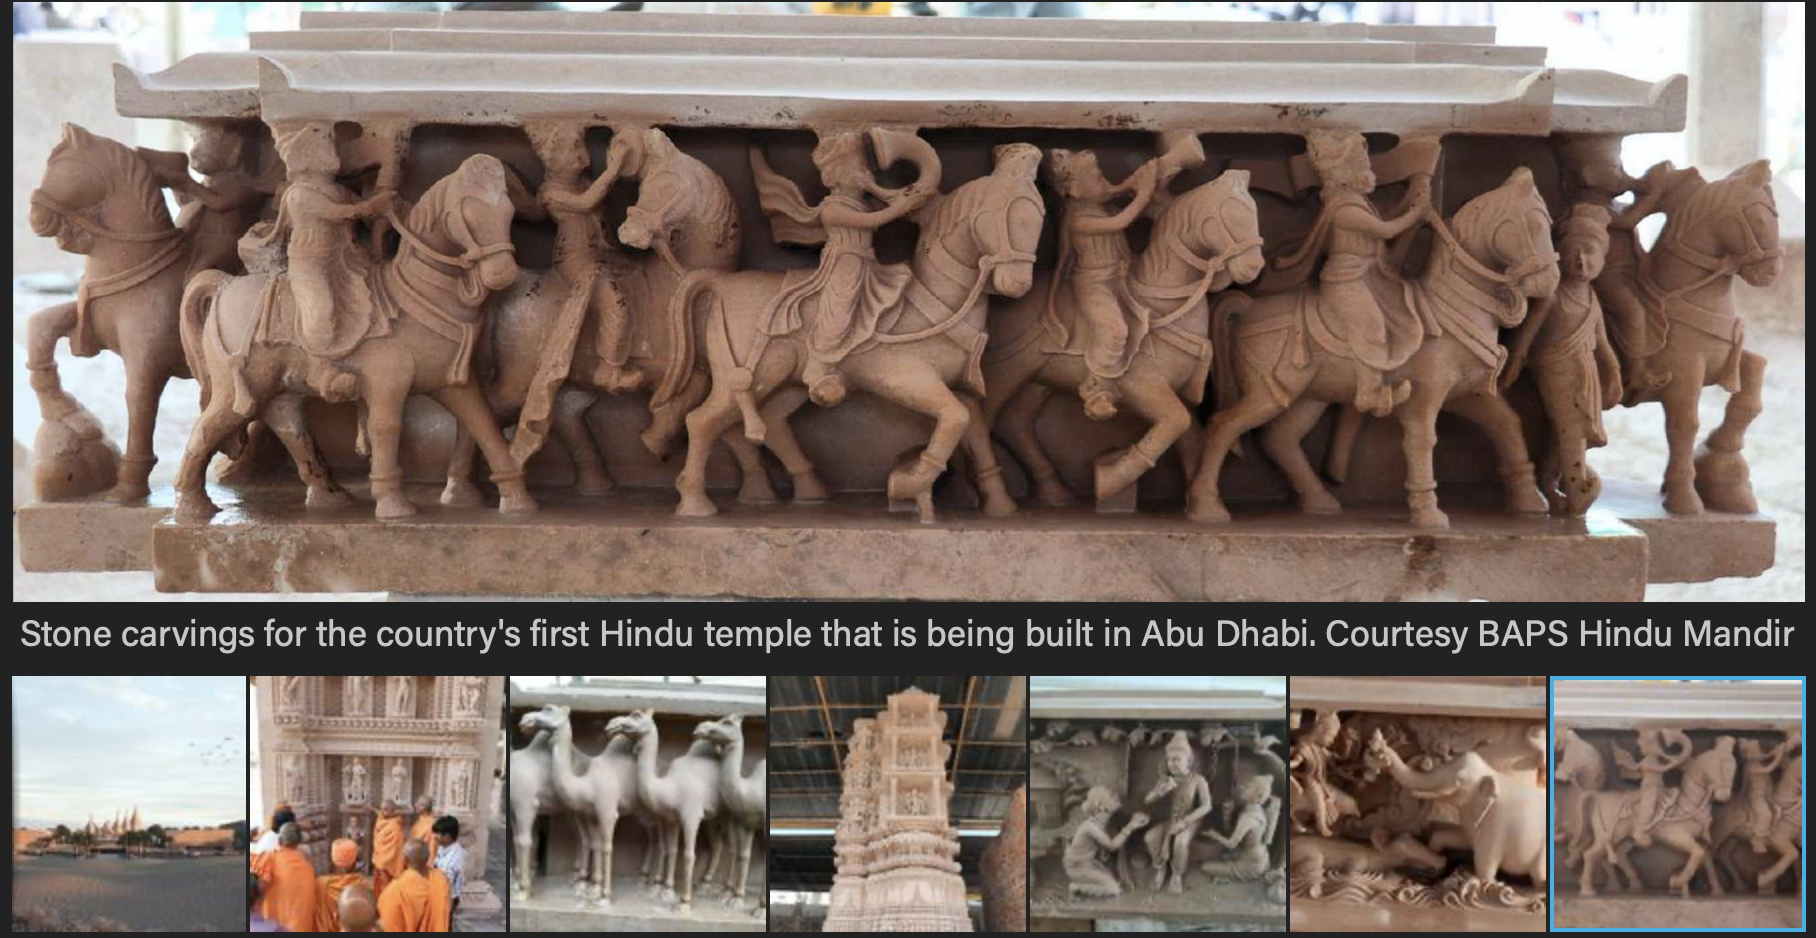 Intricate carvings for Abu Dhabi's first Hindu temple take shape in India